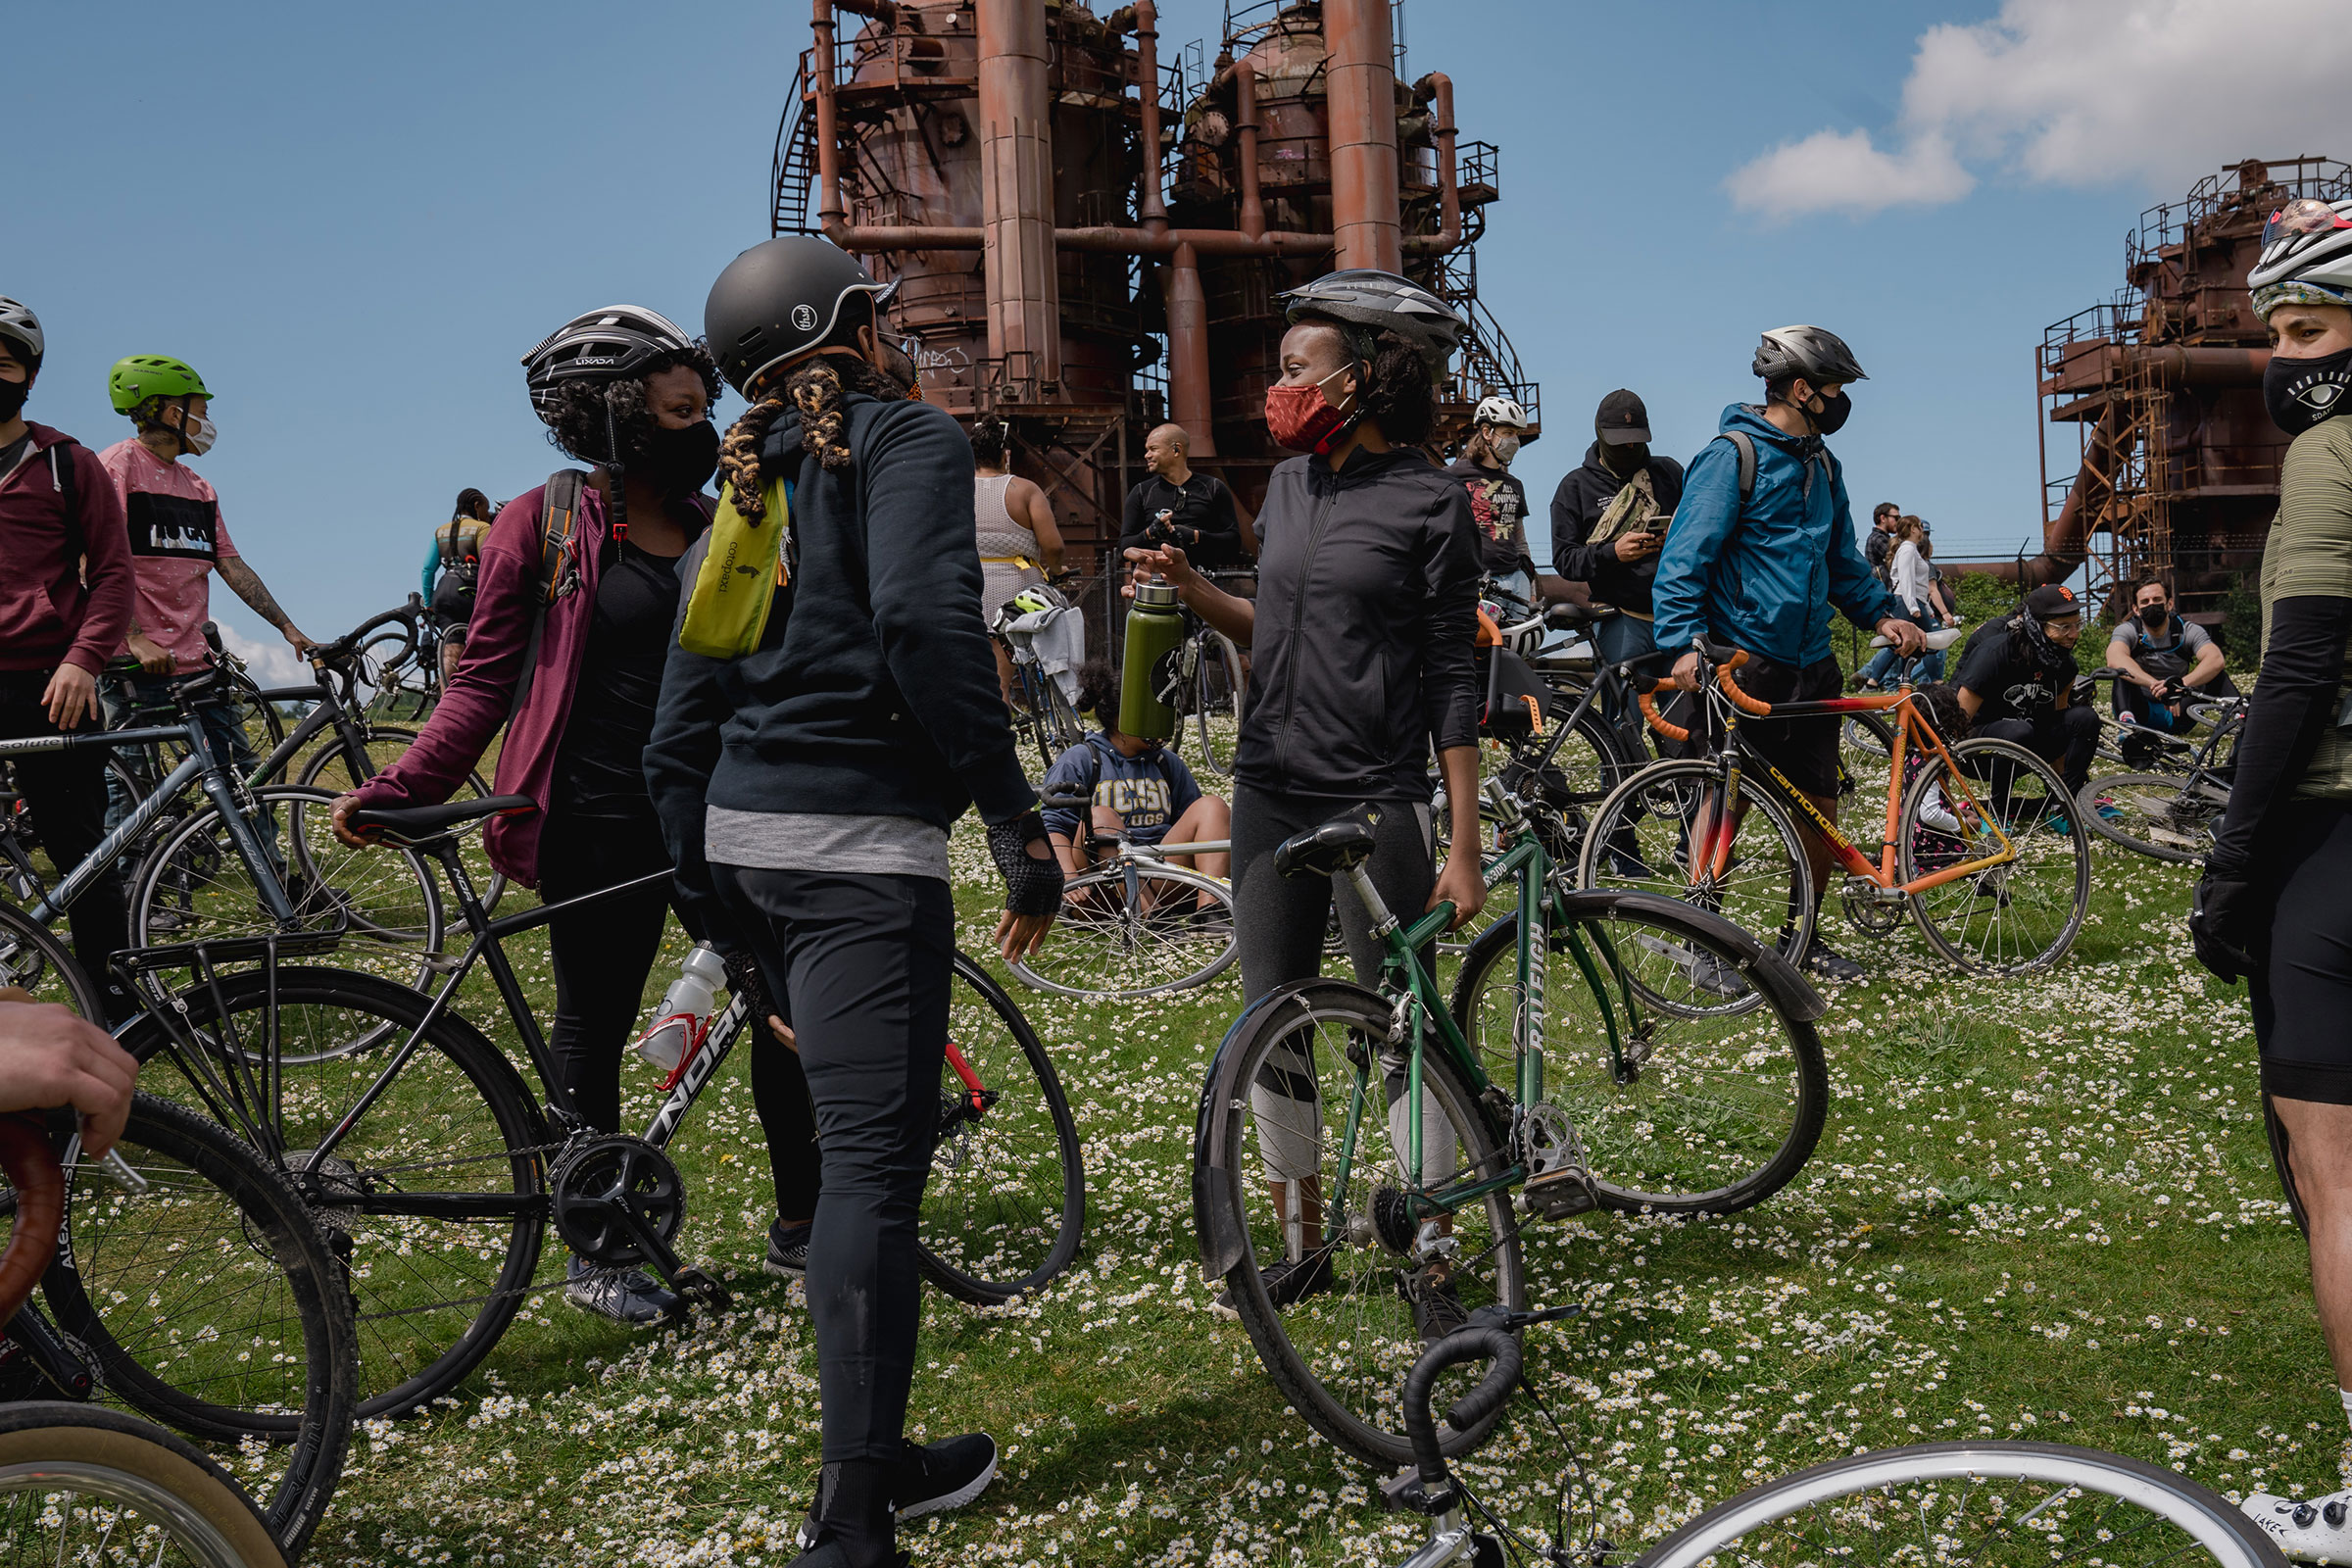 Members of the NorthStar Cycling Club at Gas Works Park in Seattle, during the club’s weekly “Sunday Service” ride, on May 2, 2021. (Jovelle Tamayo for TIME)